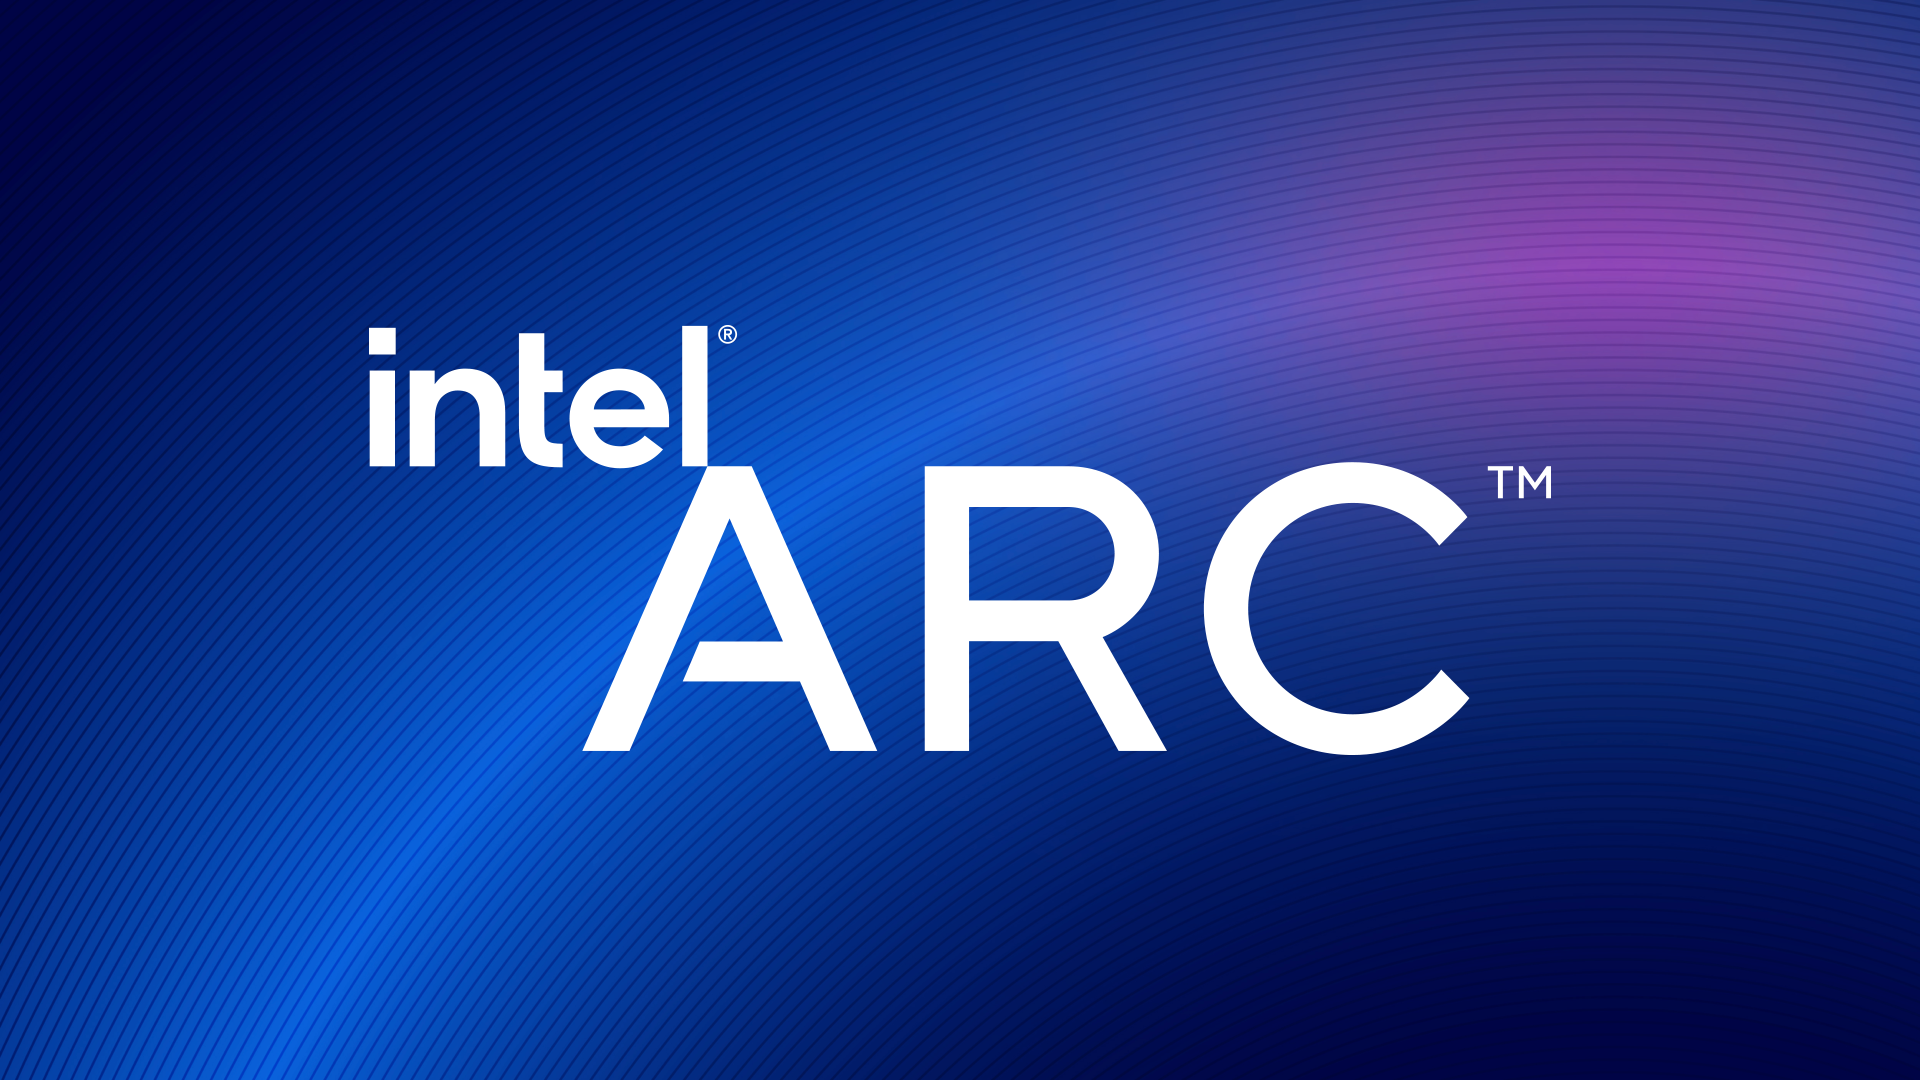 Intel Arc Gpus Could Give Gamers A Reason To Drop Windows 11 For Linux